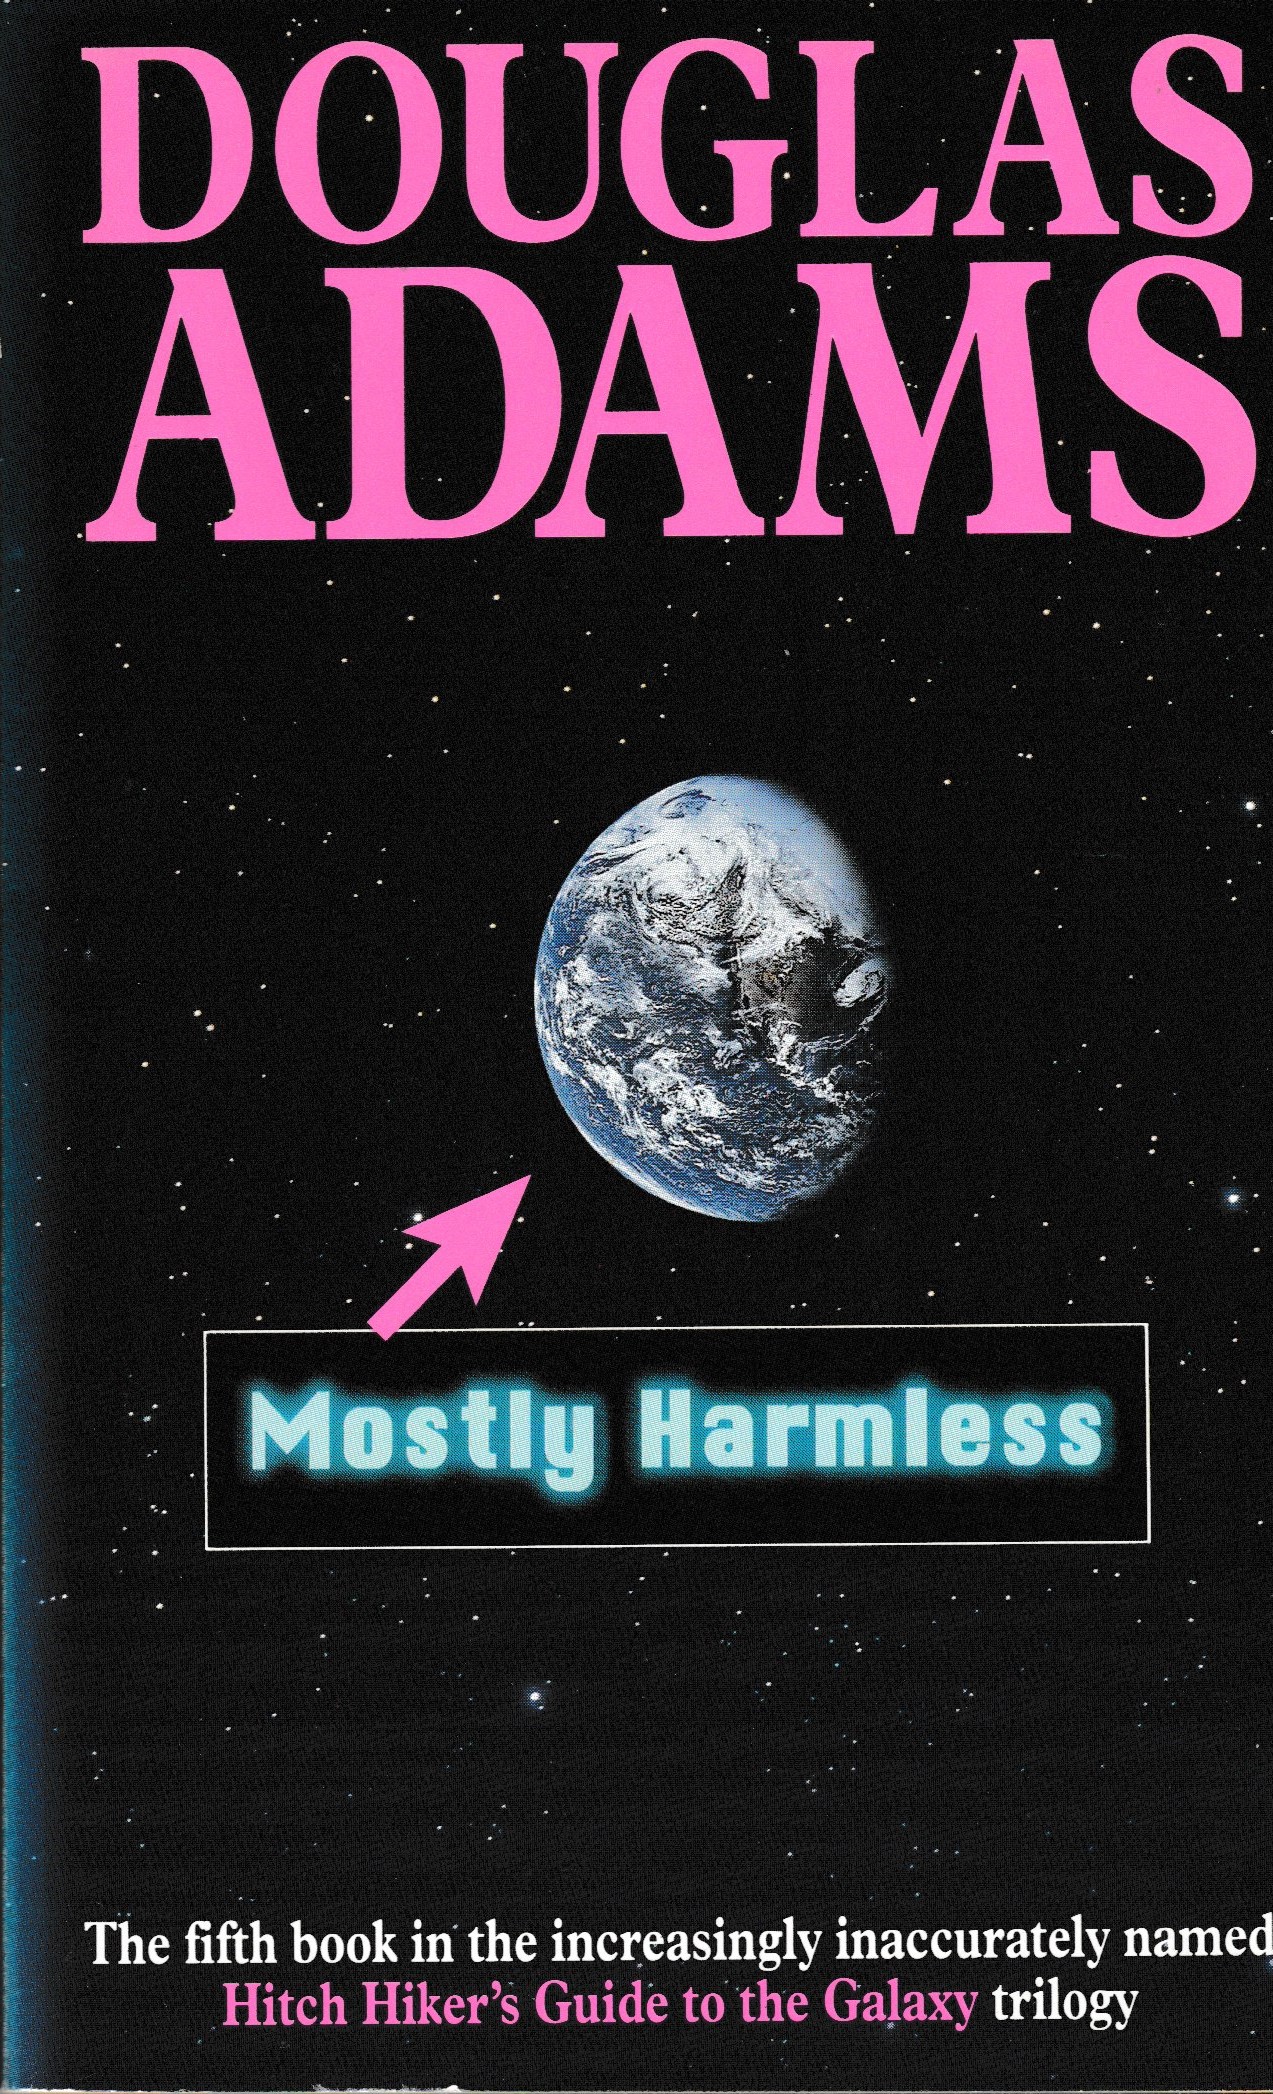 More about Mostly Harmless